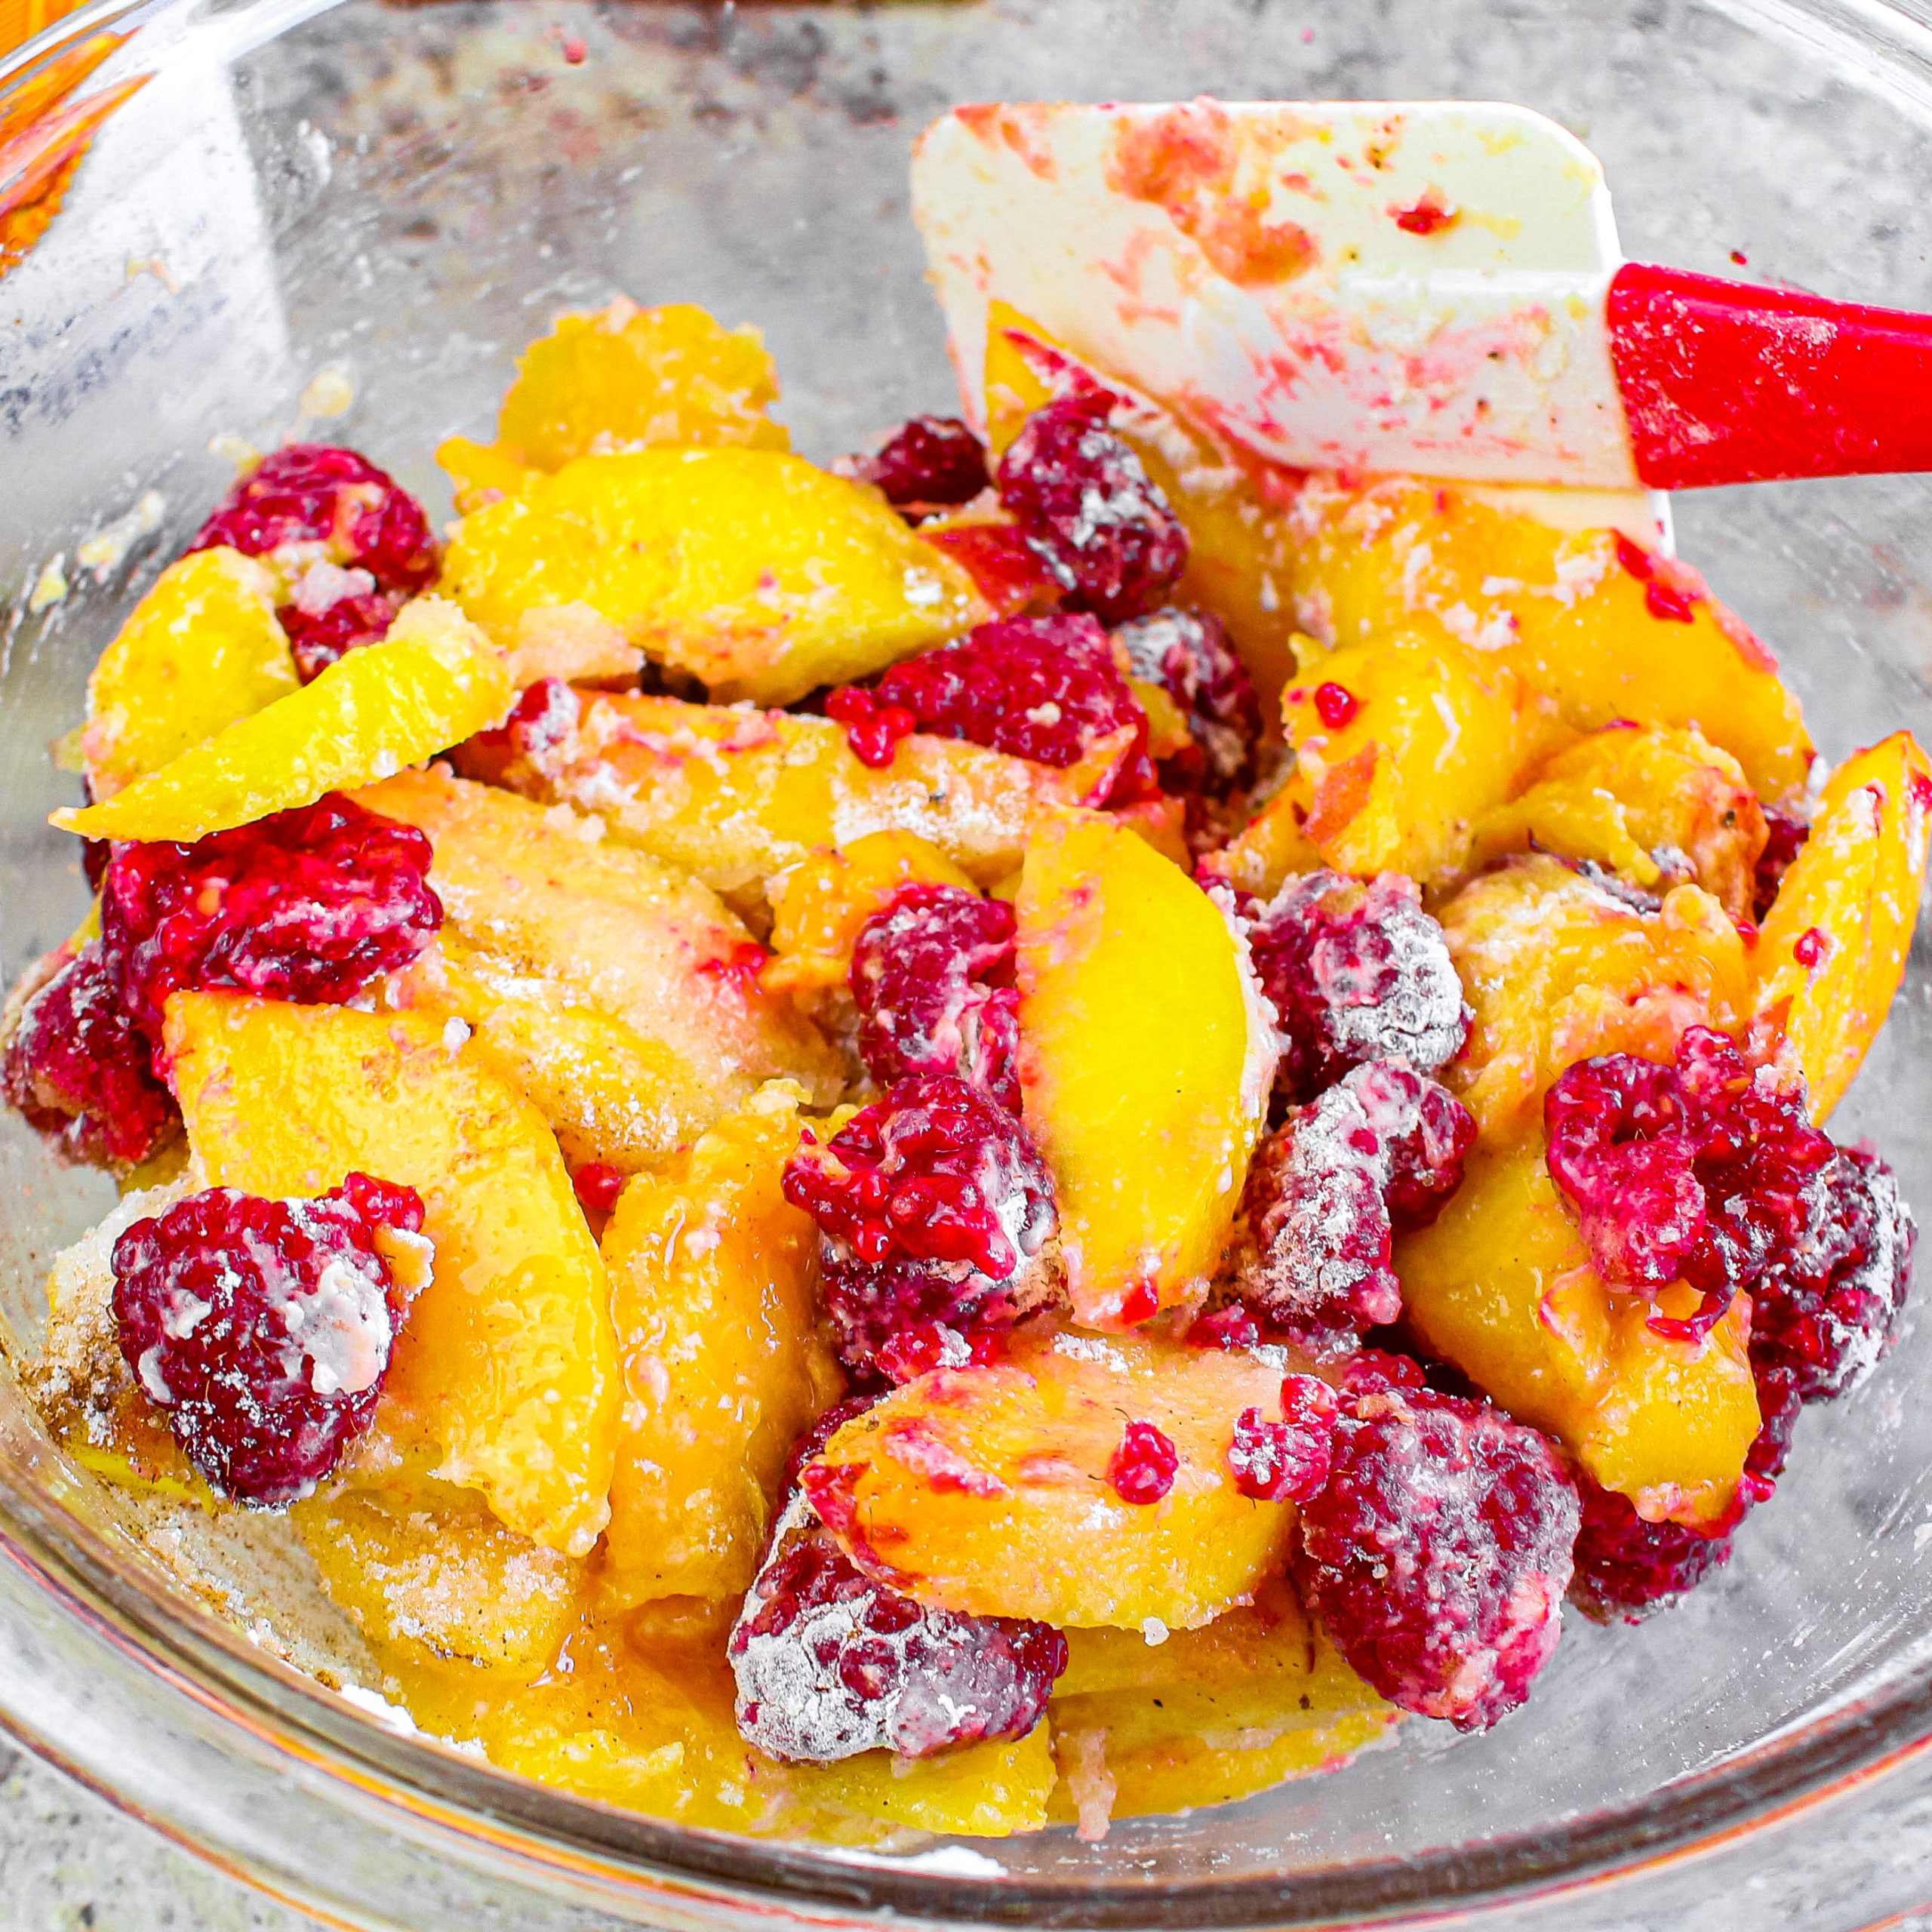 Thinly slice each peach (about 1/2 inch thick) and place the peach slices in a large mixing bowl. Add the raspberries, lemon juice, 3 Tablespoons of flour, granulated sugar and 1/2 teaspoon cinnamon. Gently stir about 3-4 times or until the flour is absorbed.